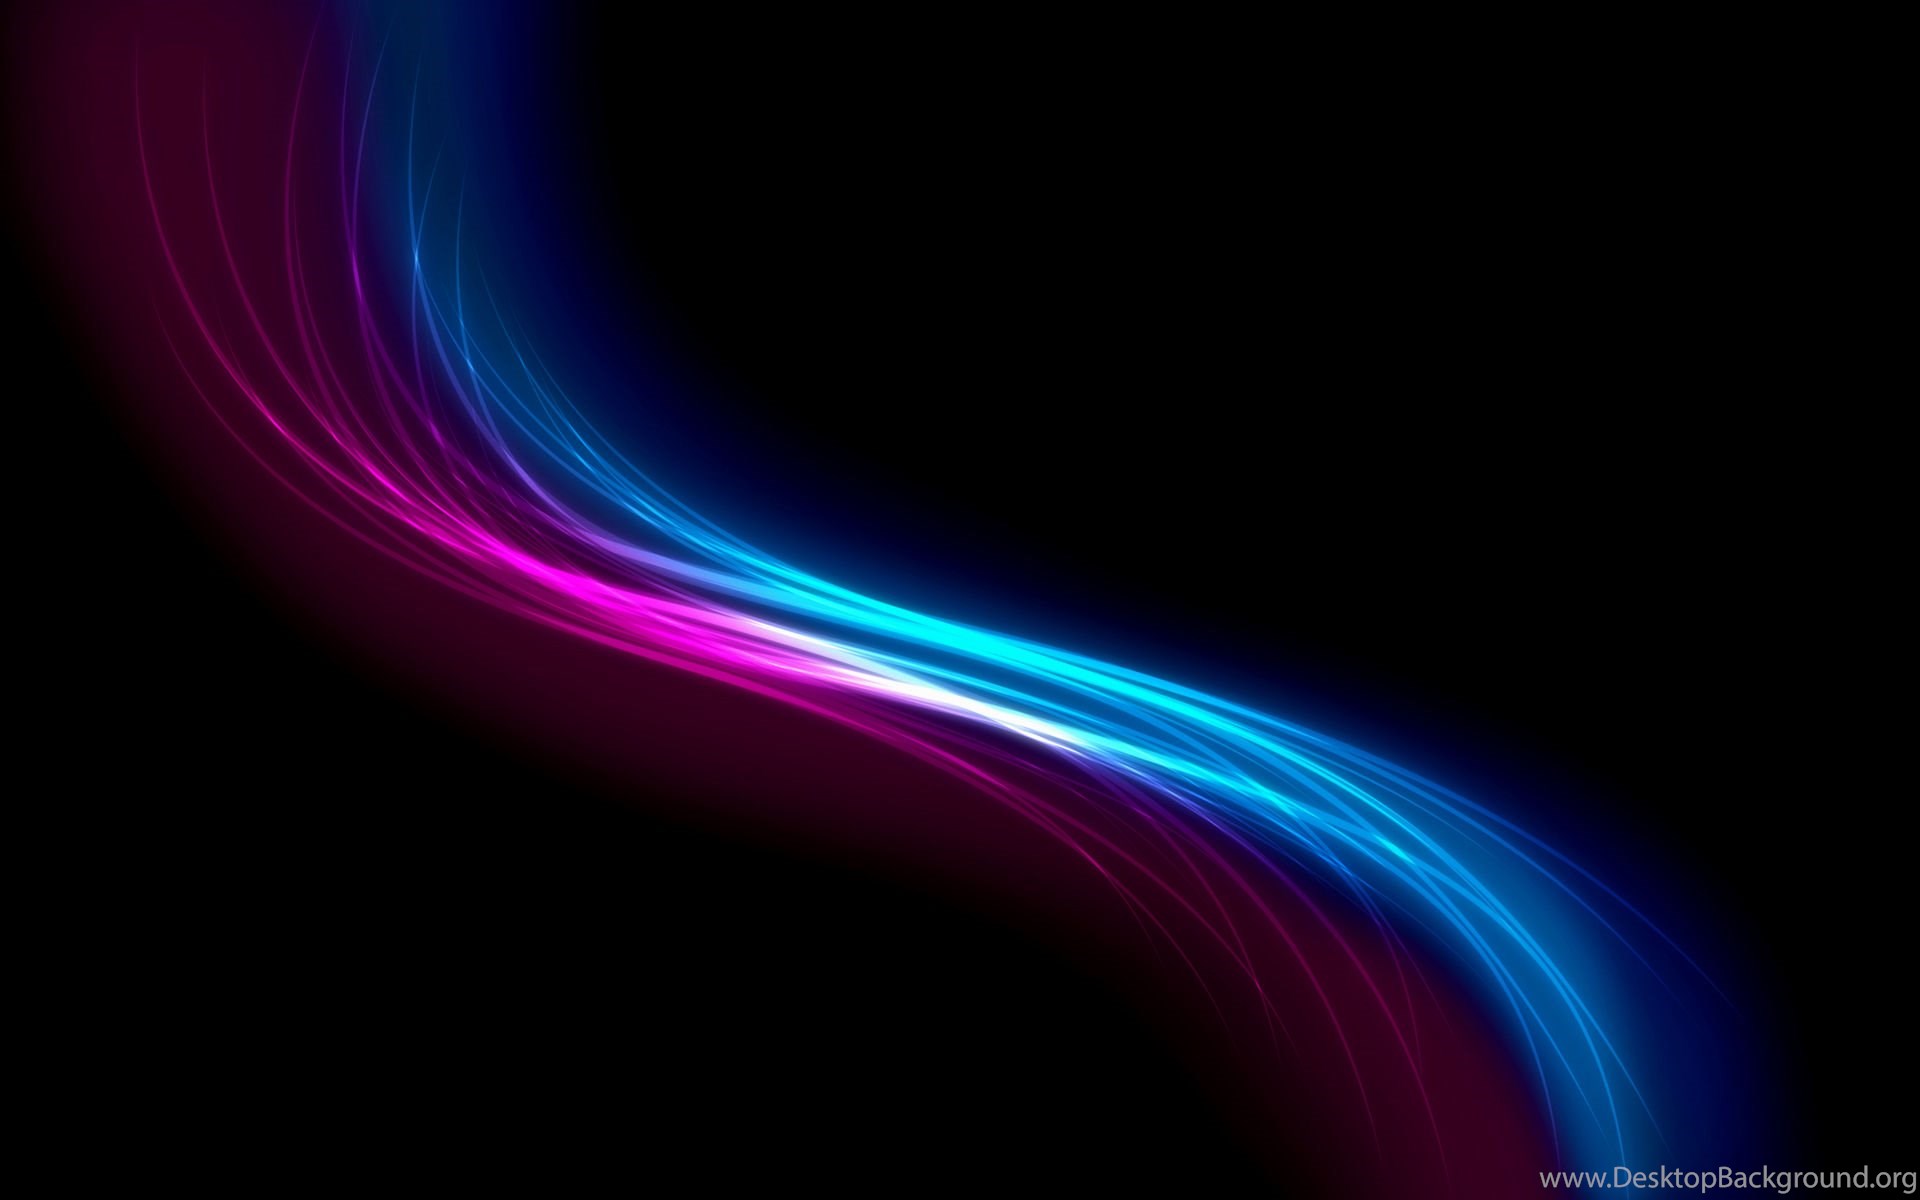 Dynamic Wallpapers For Ipad Hd Wallpapers Desktop Background